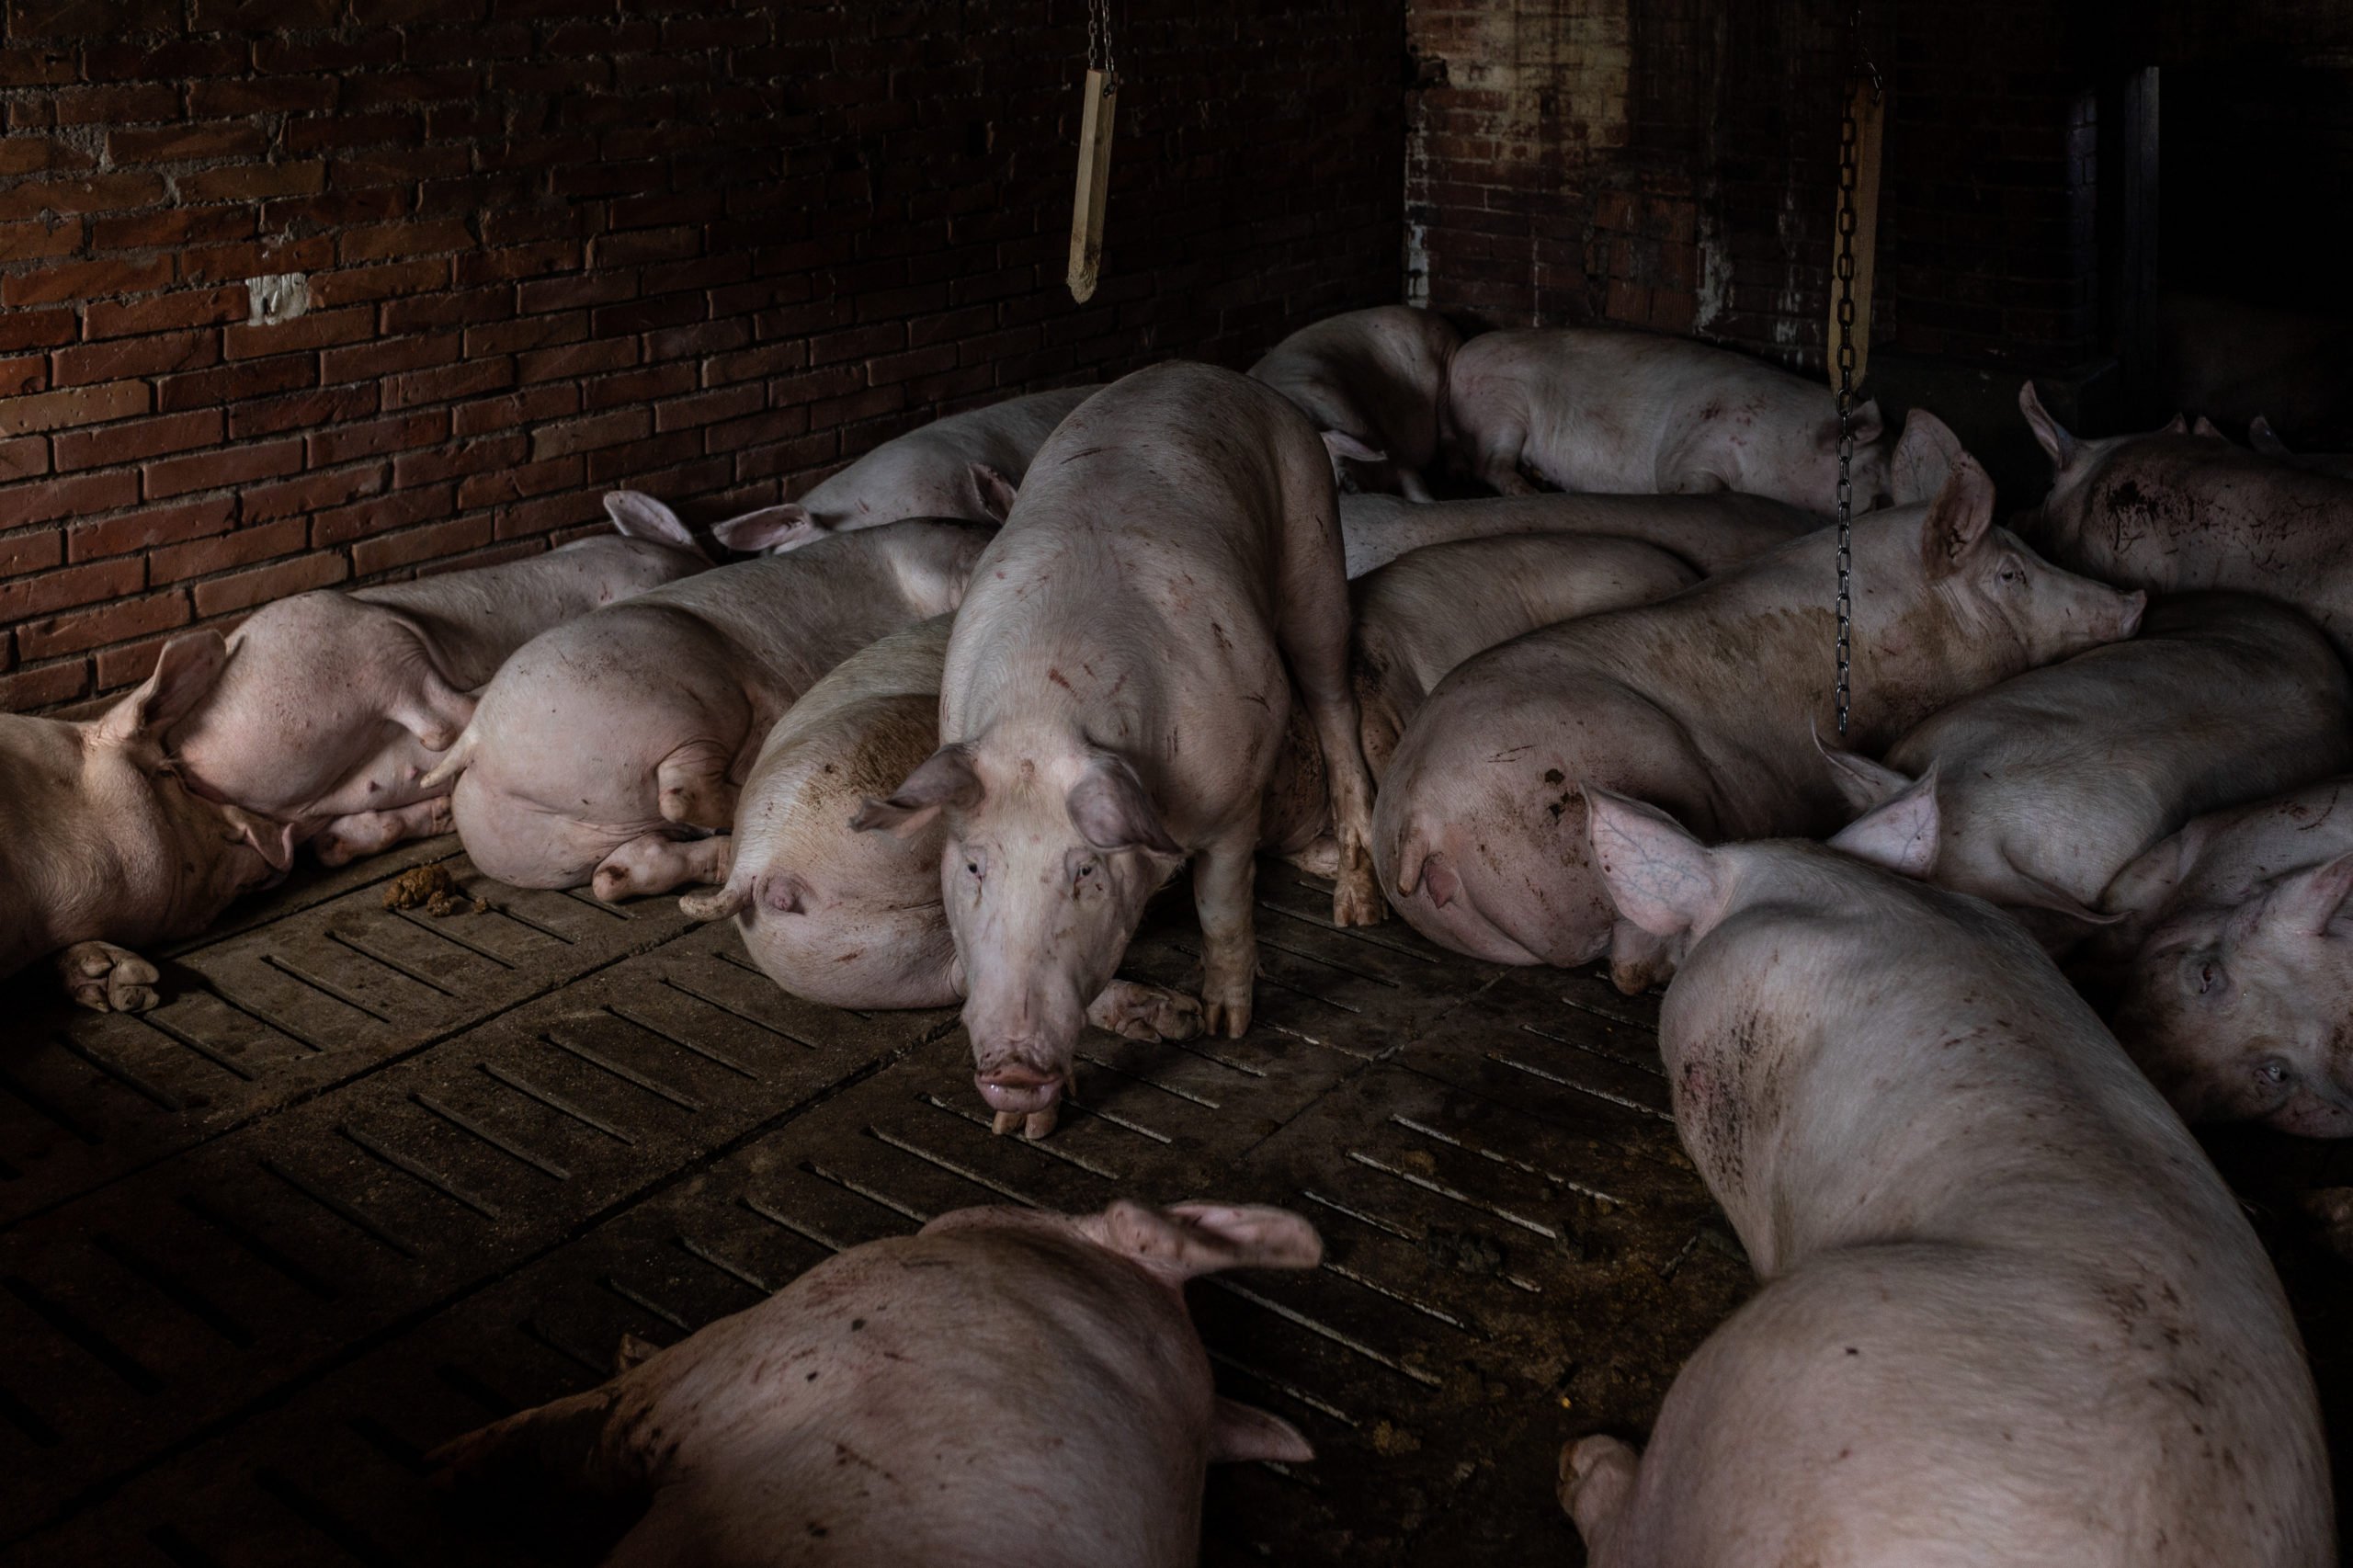 ALBERETO, ITALY - MAY 22: Pigs that survived the flood lay in a pigsty at farm on May 22, 2023 in Albereto, Italy. Fifteen people have died and forty thousands have been evacuated from their homes after torrential rain wreaked mayhem in the northern Italian region of Emilia-Romagna, causing severe flooding and landslides. (Photo by Emanuele Cremaschi/Getty Images)